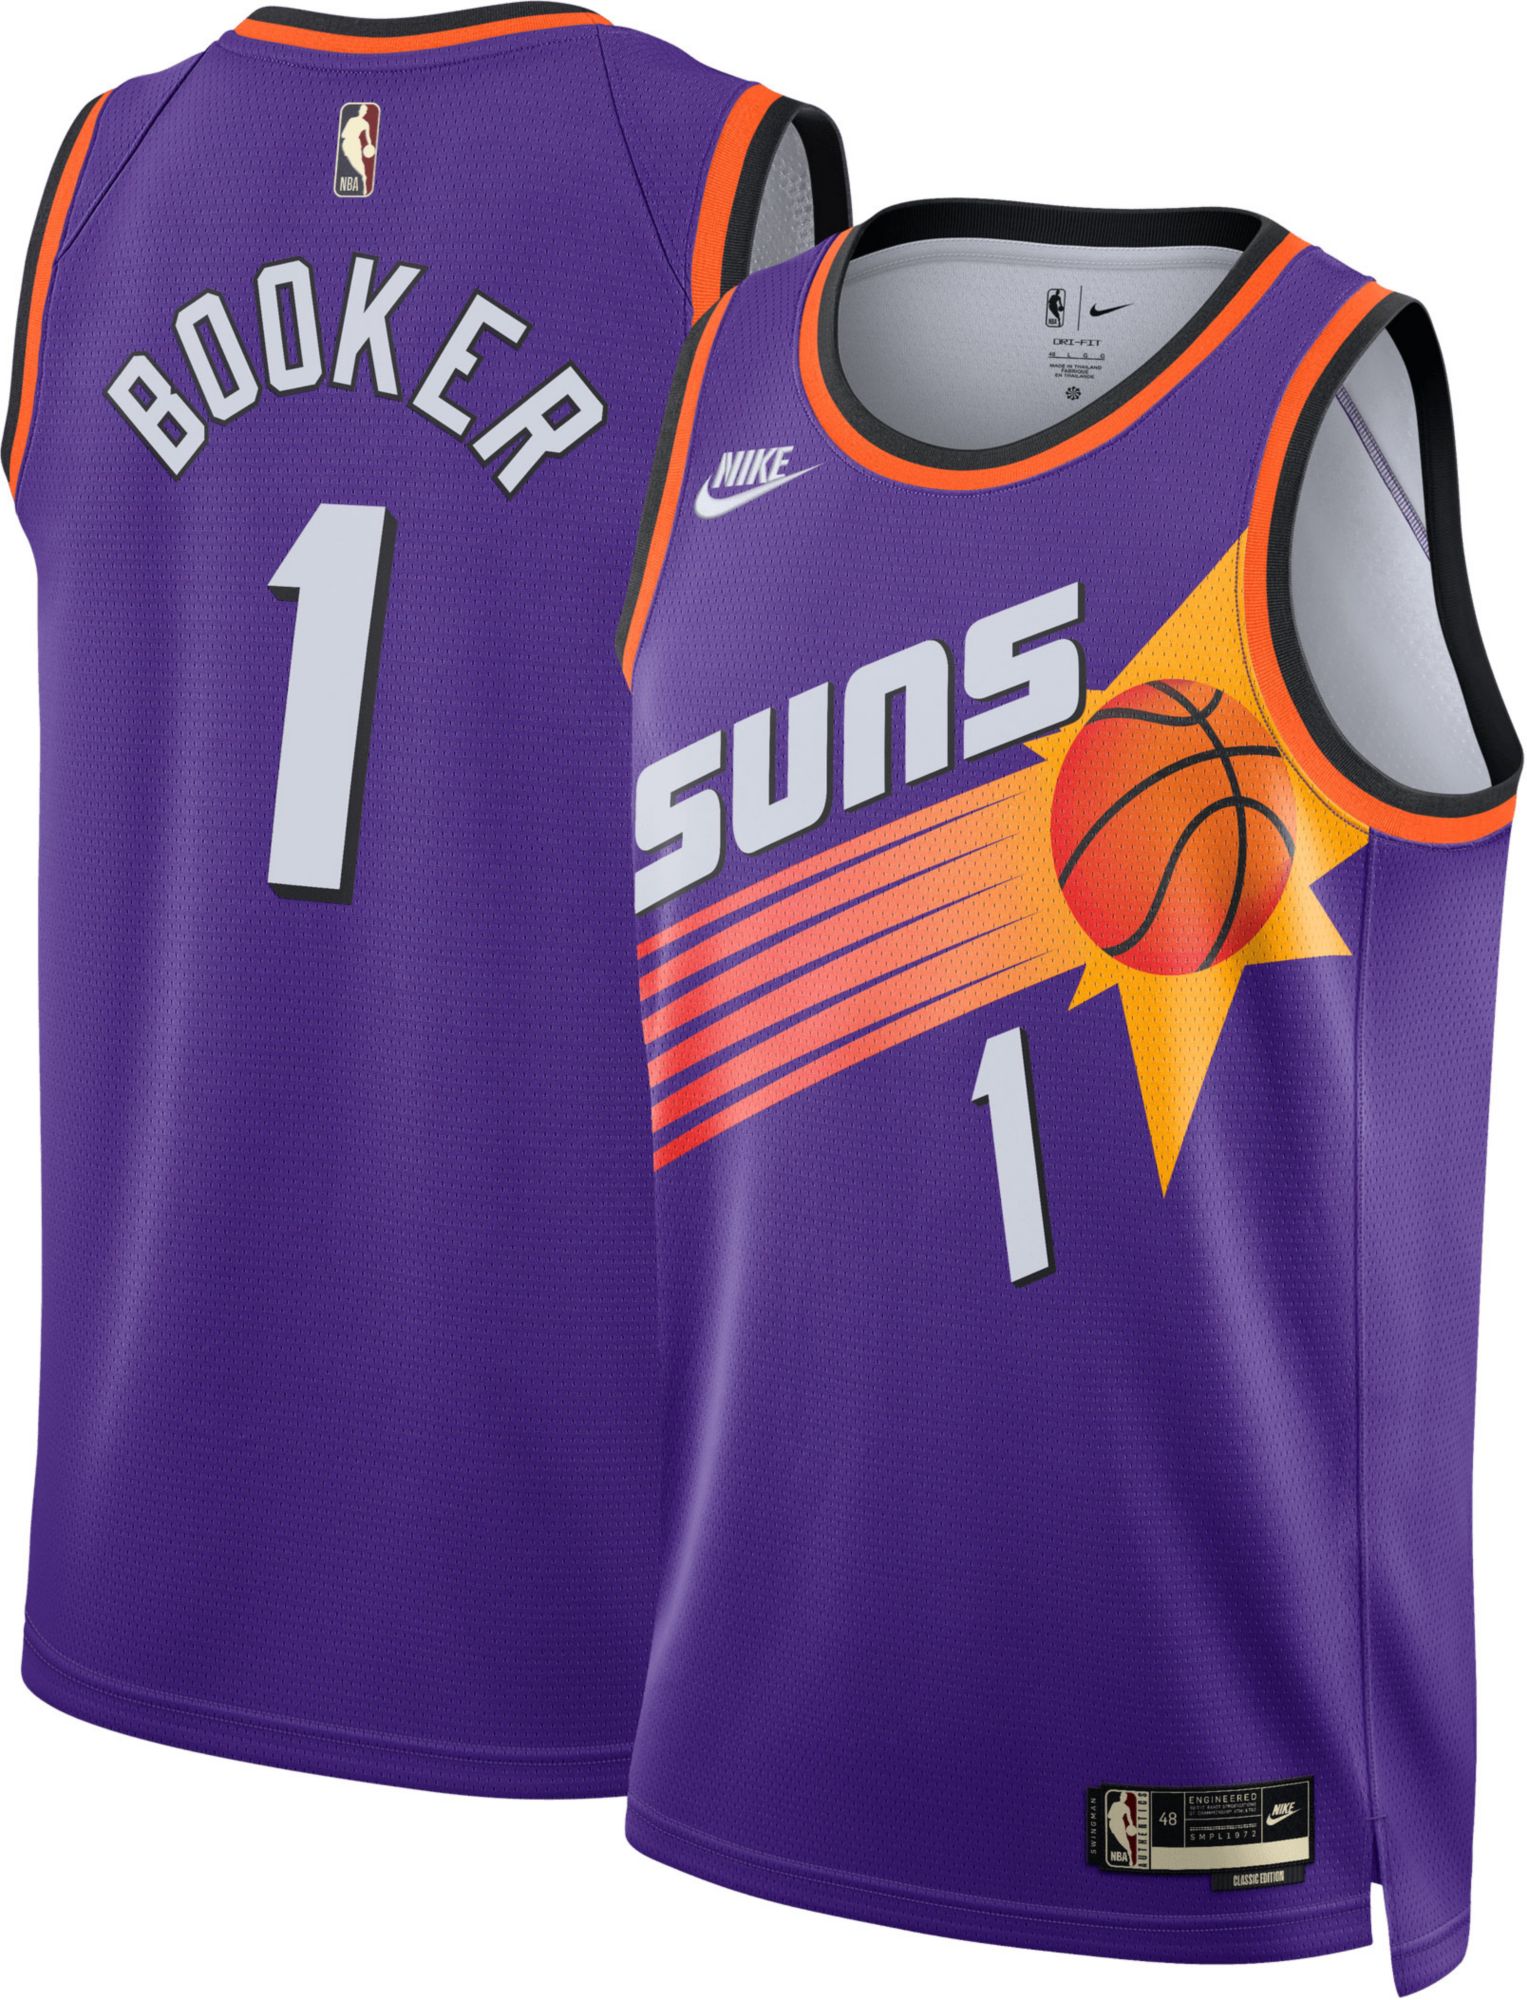 Phoenix Suns Nike City Edition Swingman Jersey 22 - DkTeal - Kevin Durant -  Youth